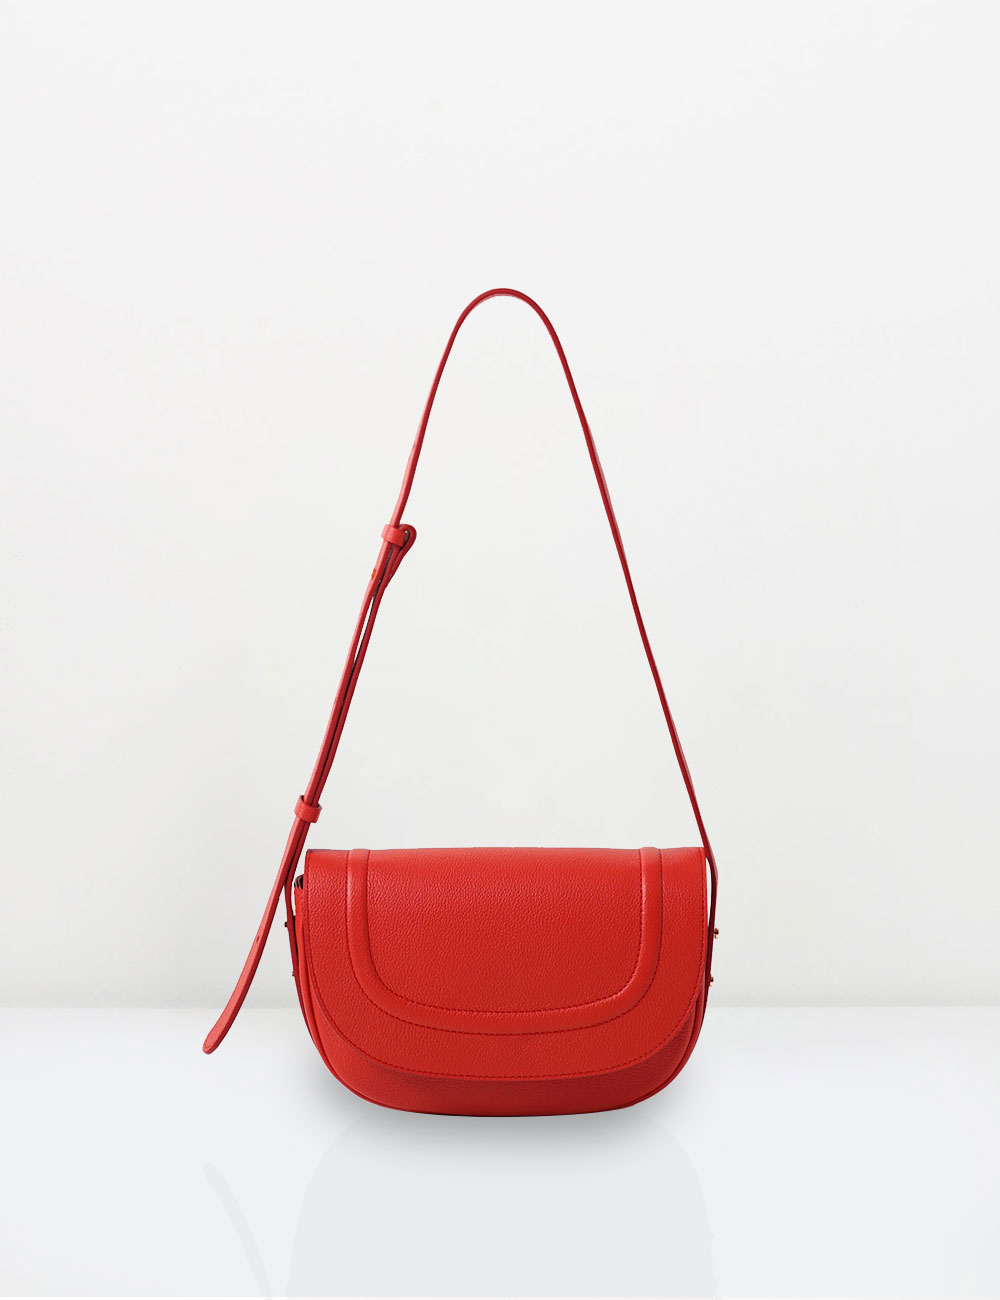 [REFURB 50% OFF] LONI small embo / red